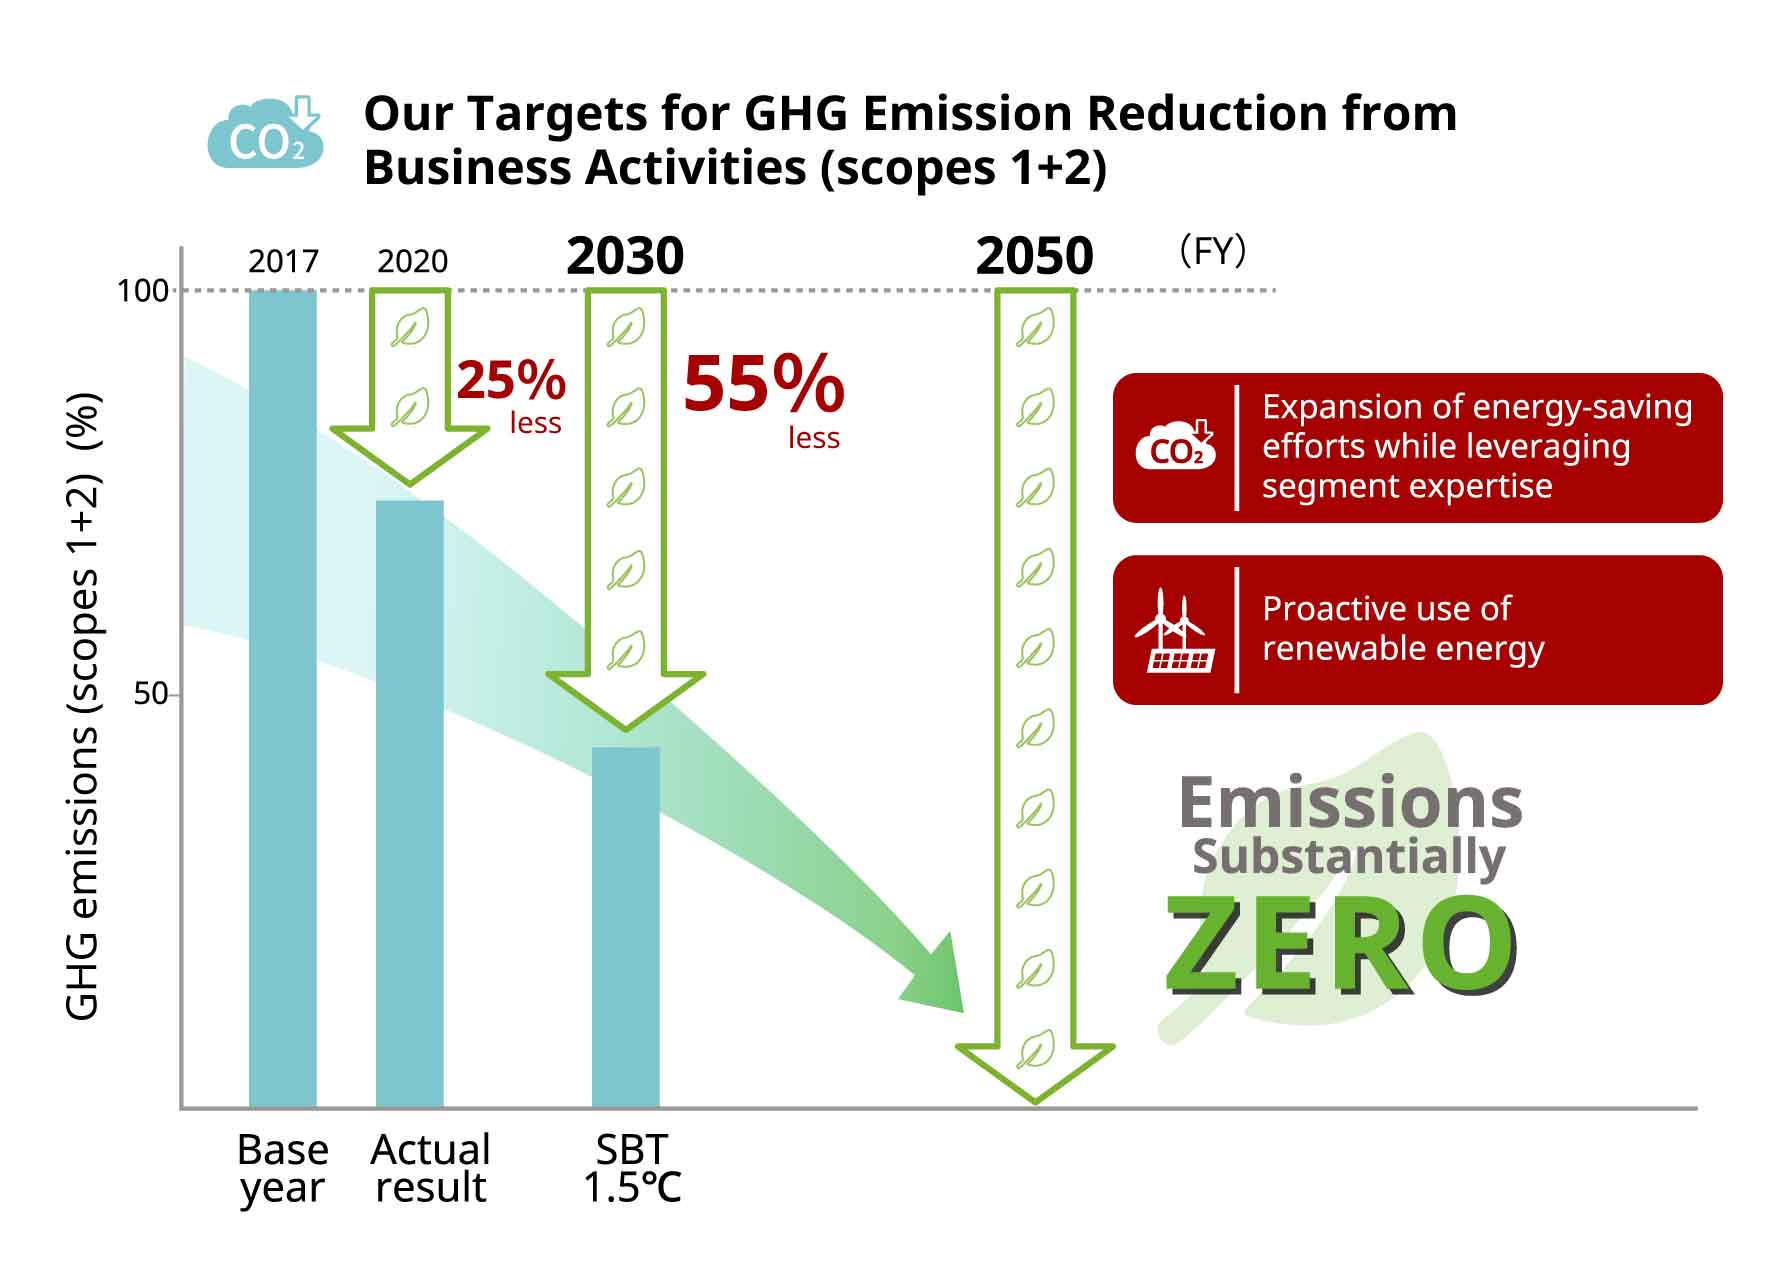 Azbil To Reduce Greenhouse Gas Emissions To 55 By 2030 From 2017 To Achieve Substantially Zero